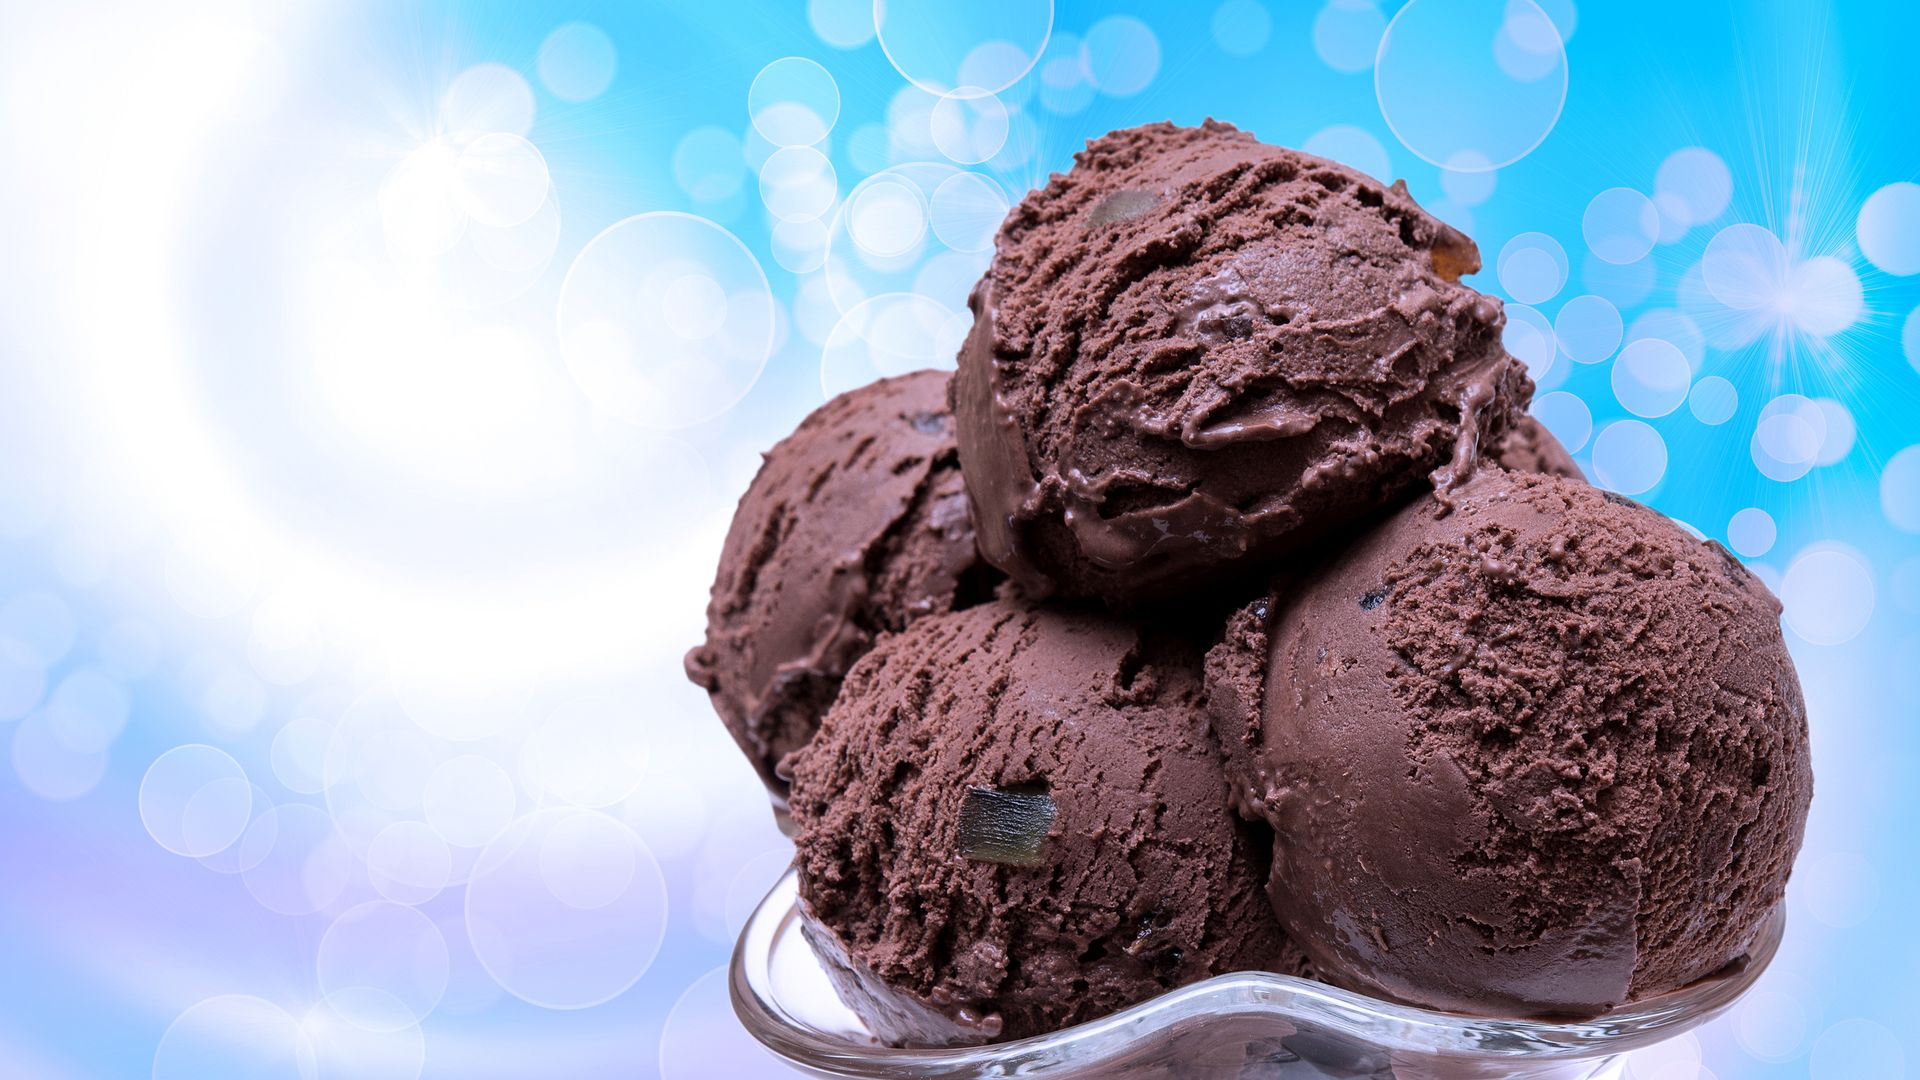 Bokeh Background And Ice Cream Hd Wallpaper - Beautiful Chocolate Ice Cream - HD Wallpaper 